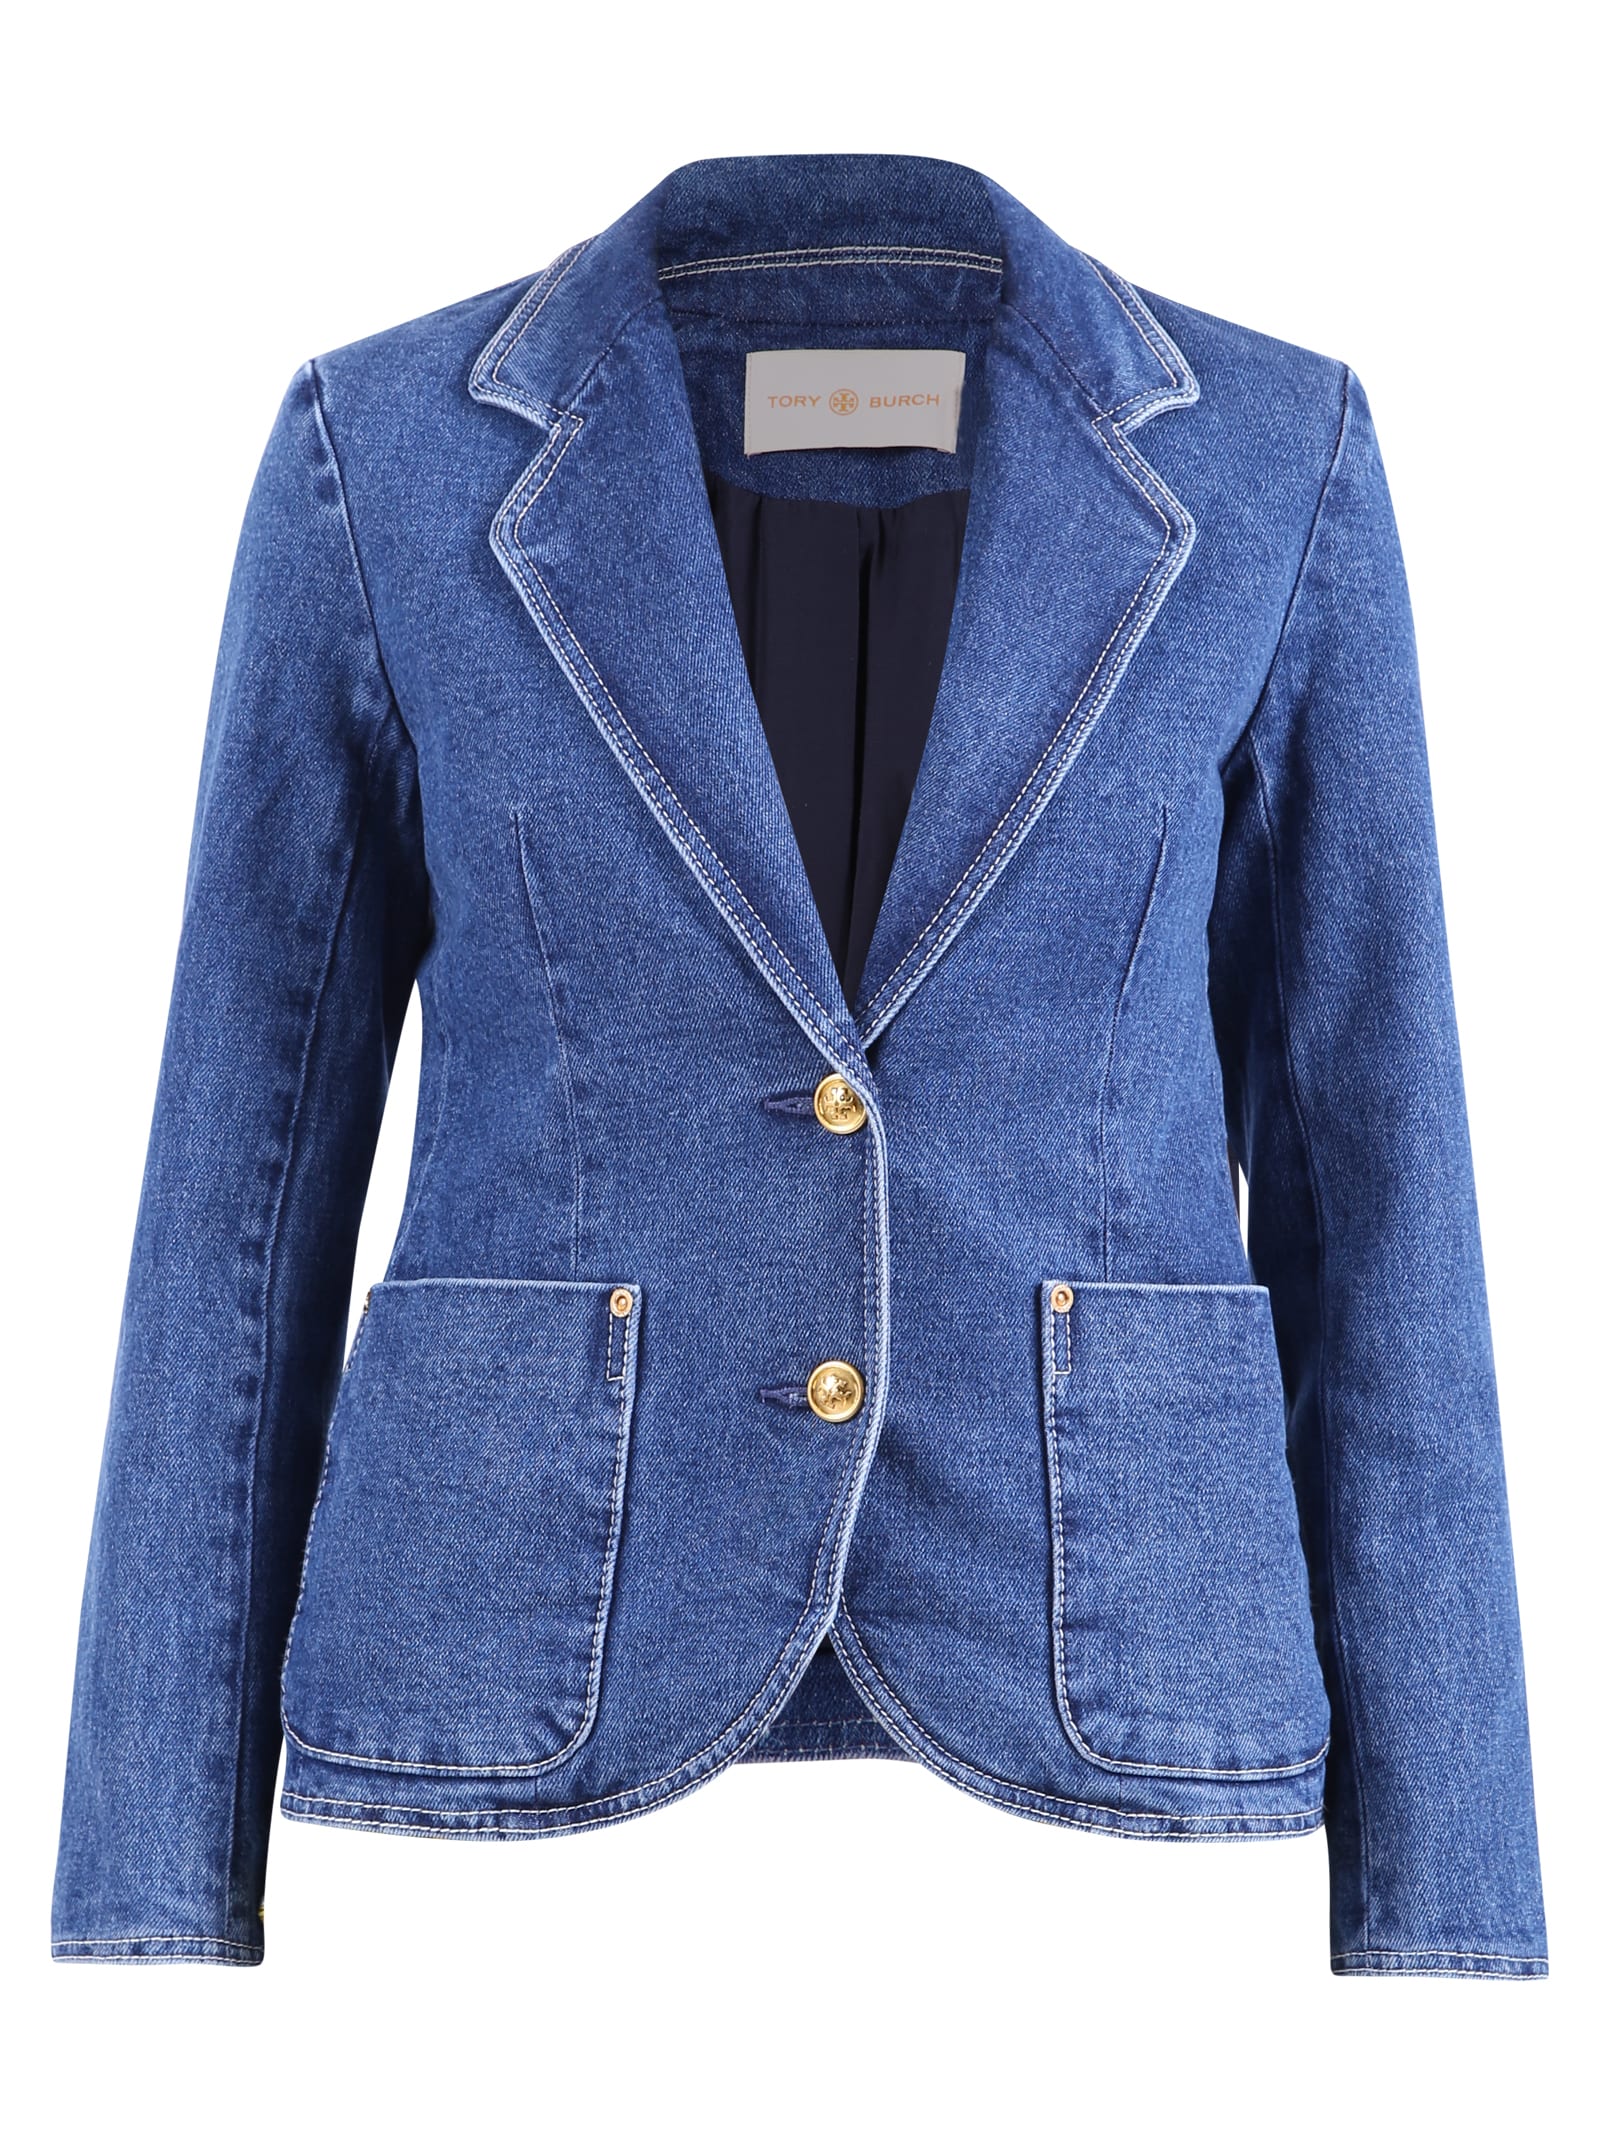 Tory Burch Single-breasted Jacket